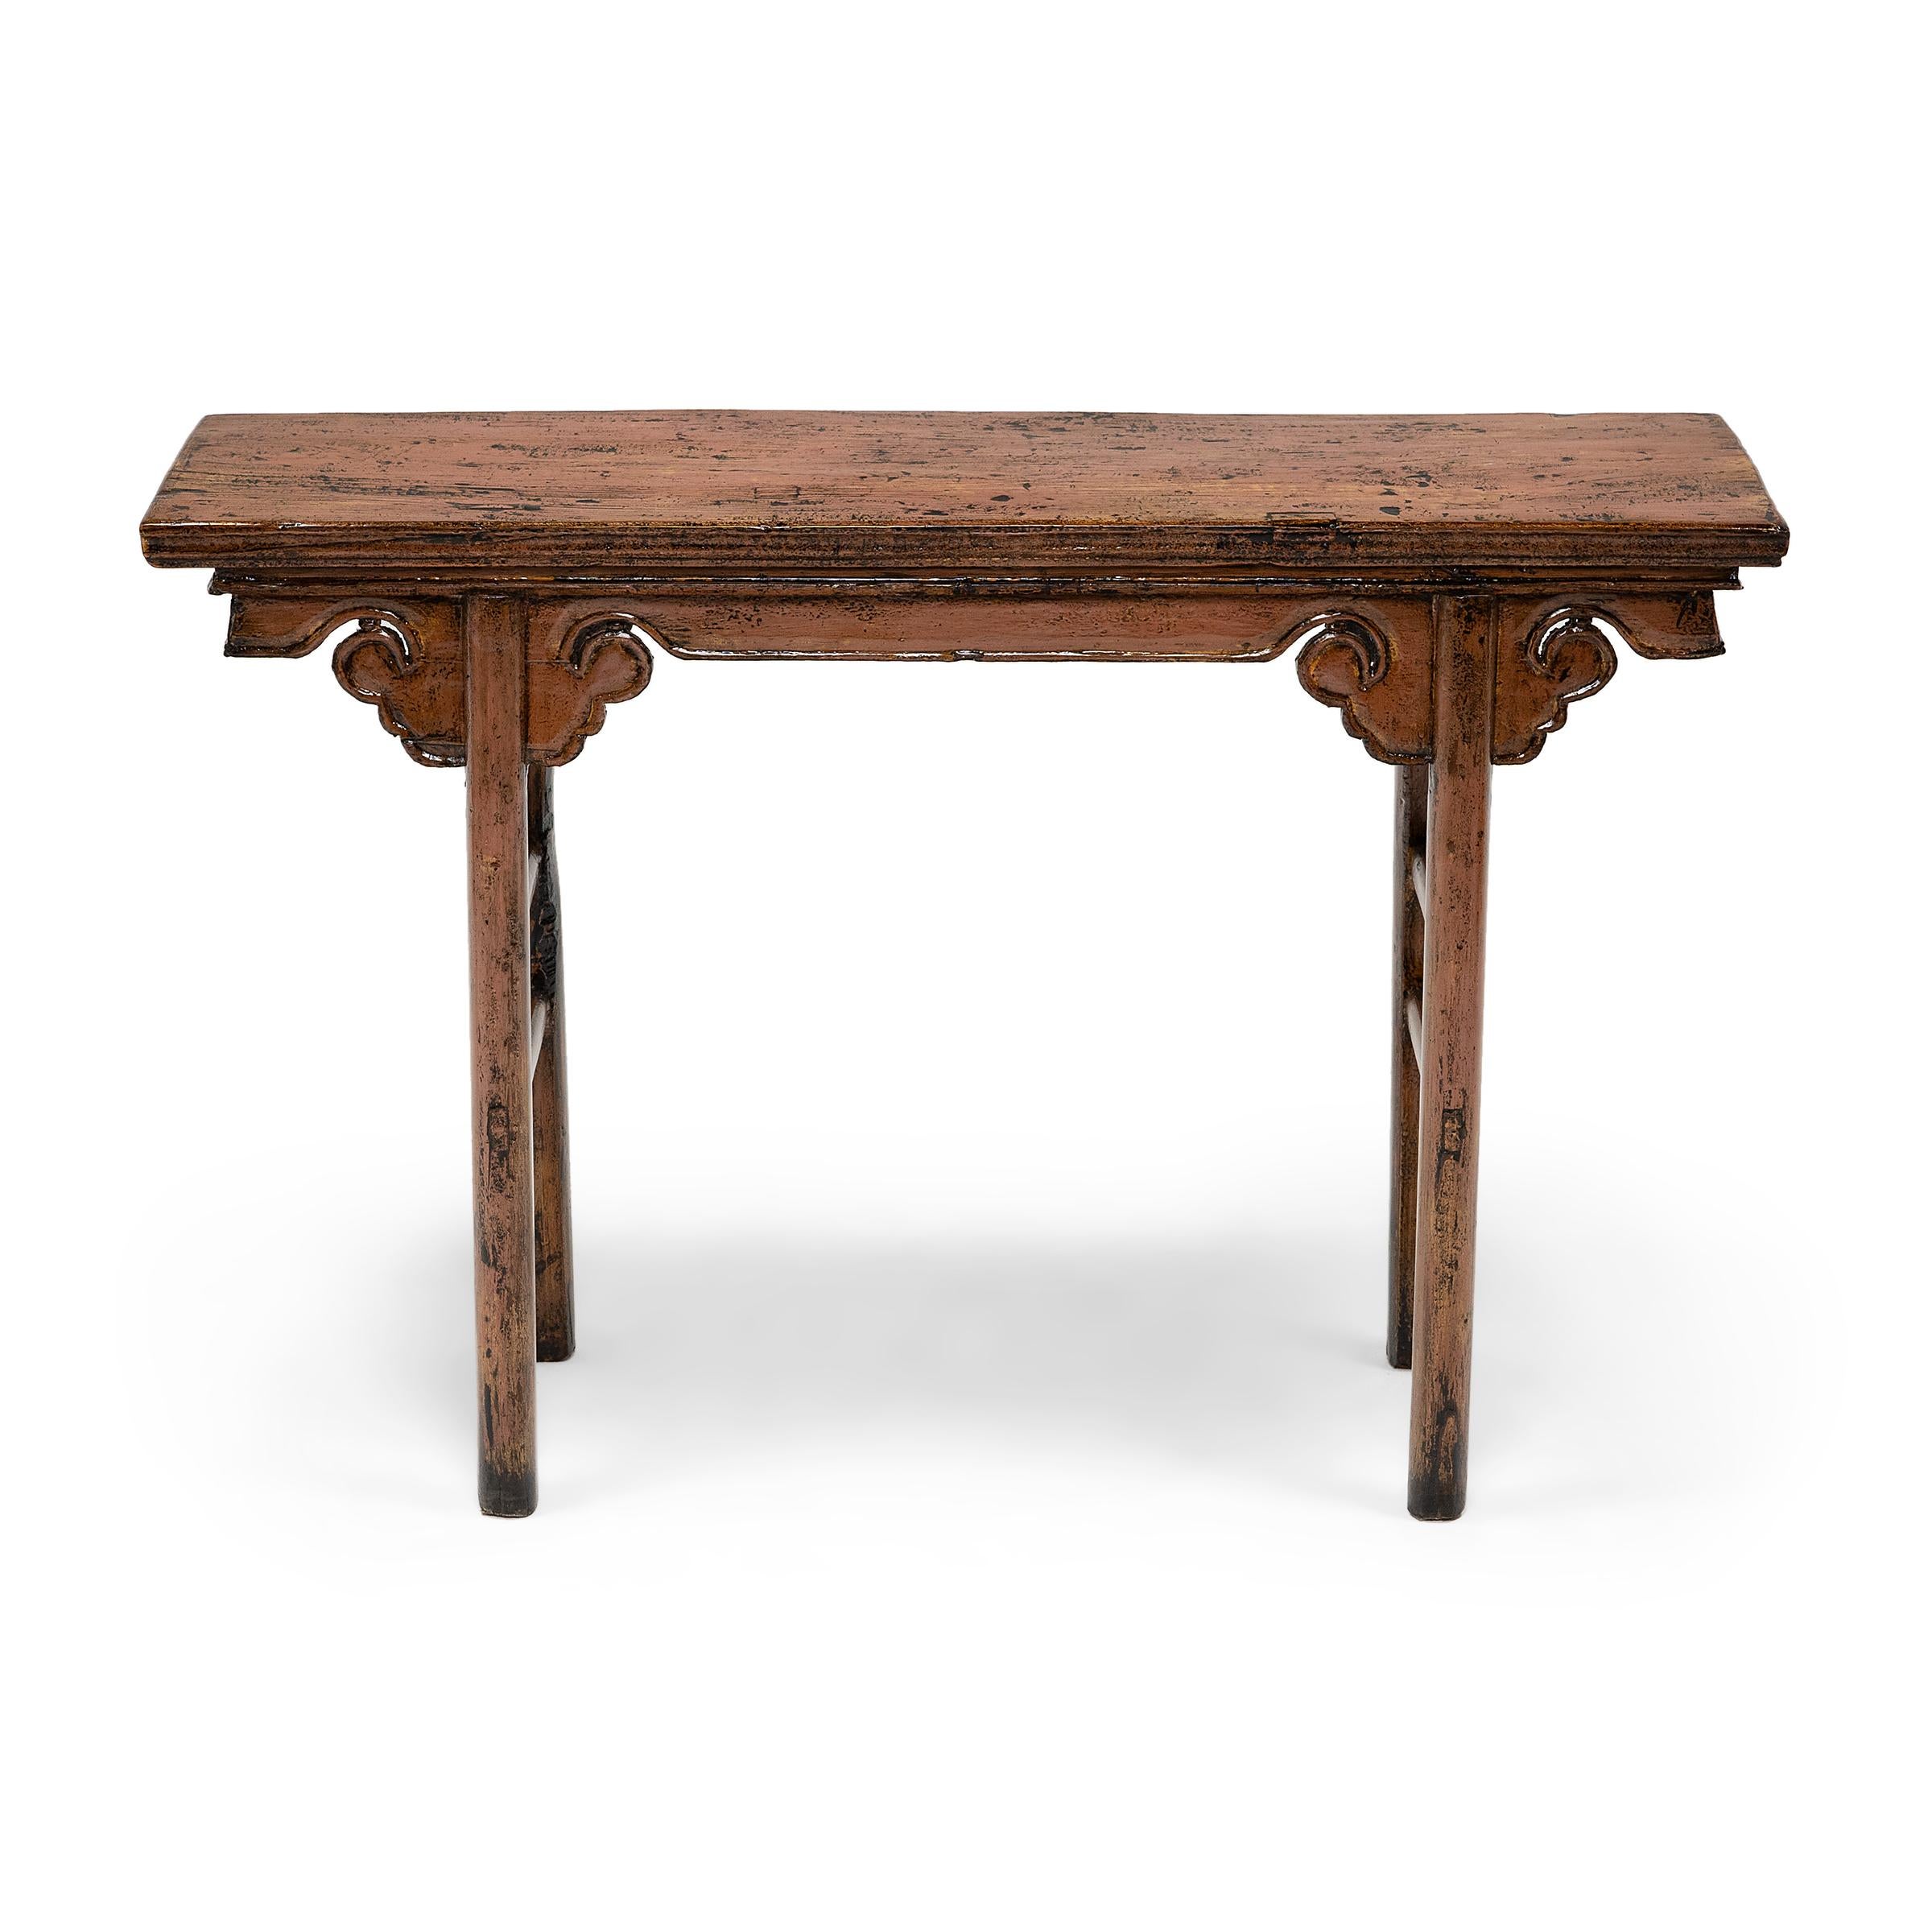 Chinese Cloud Spandrel Altar Table, c. 1900 In Good Condition For Sale In Chicago, IL